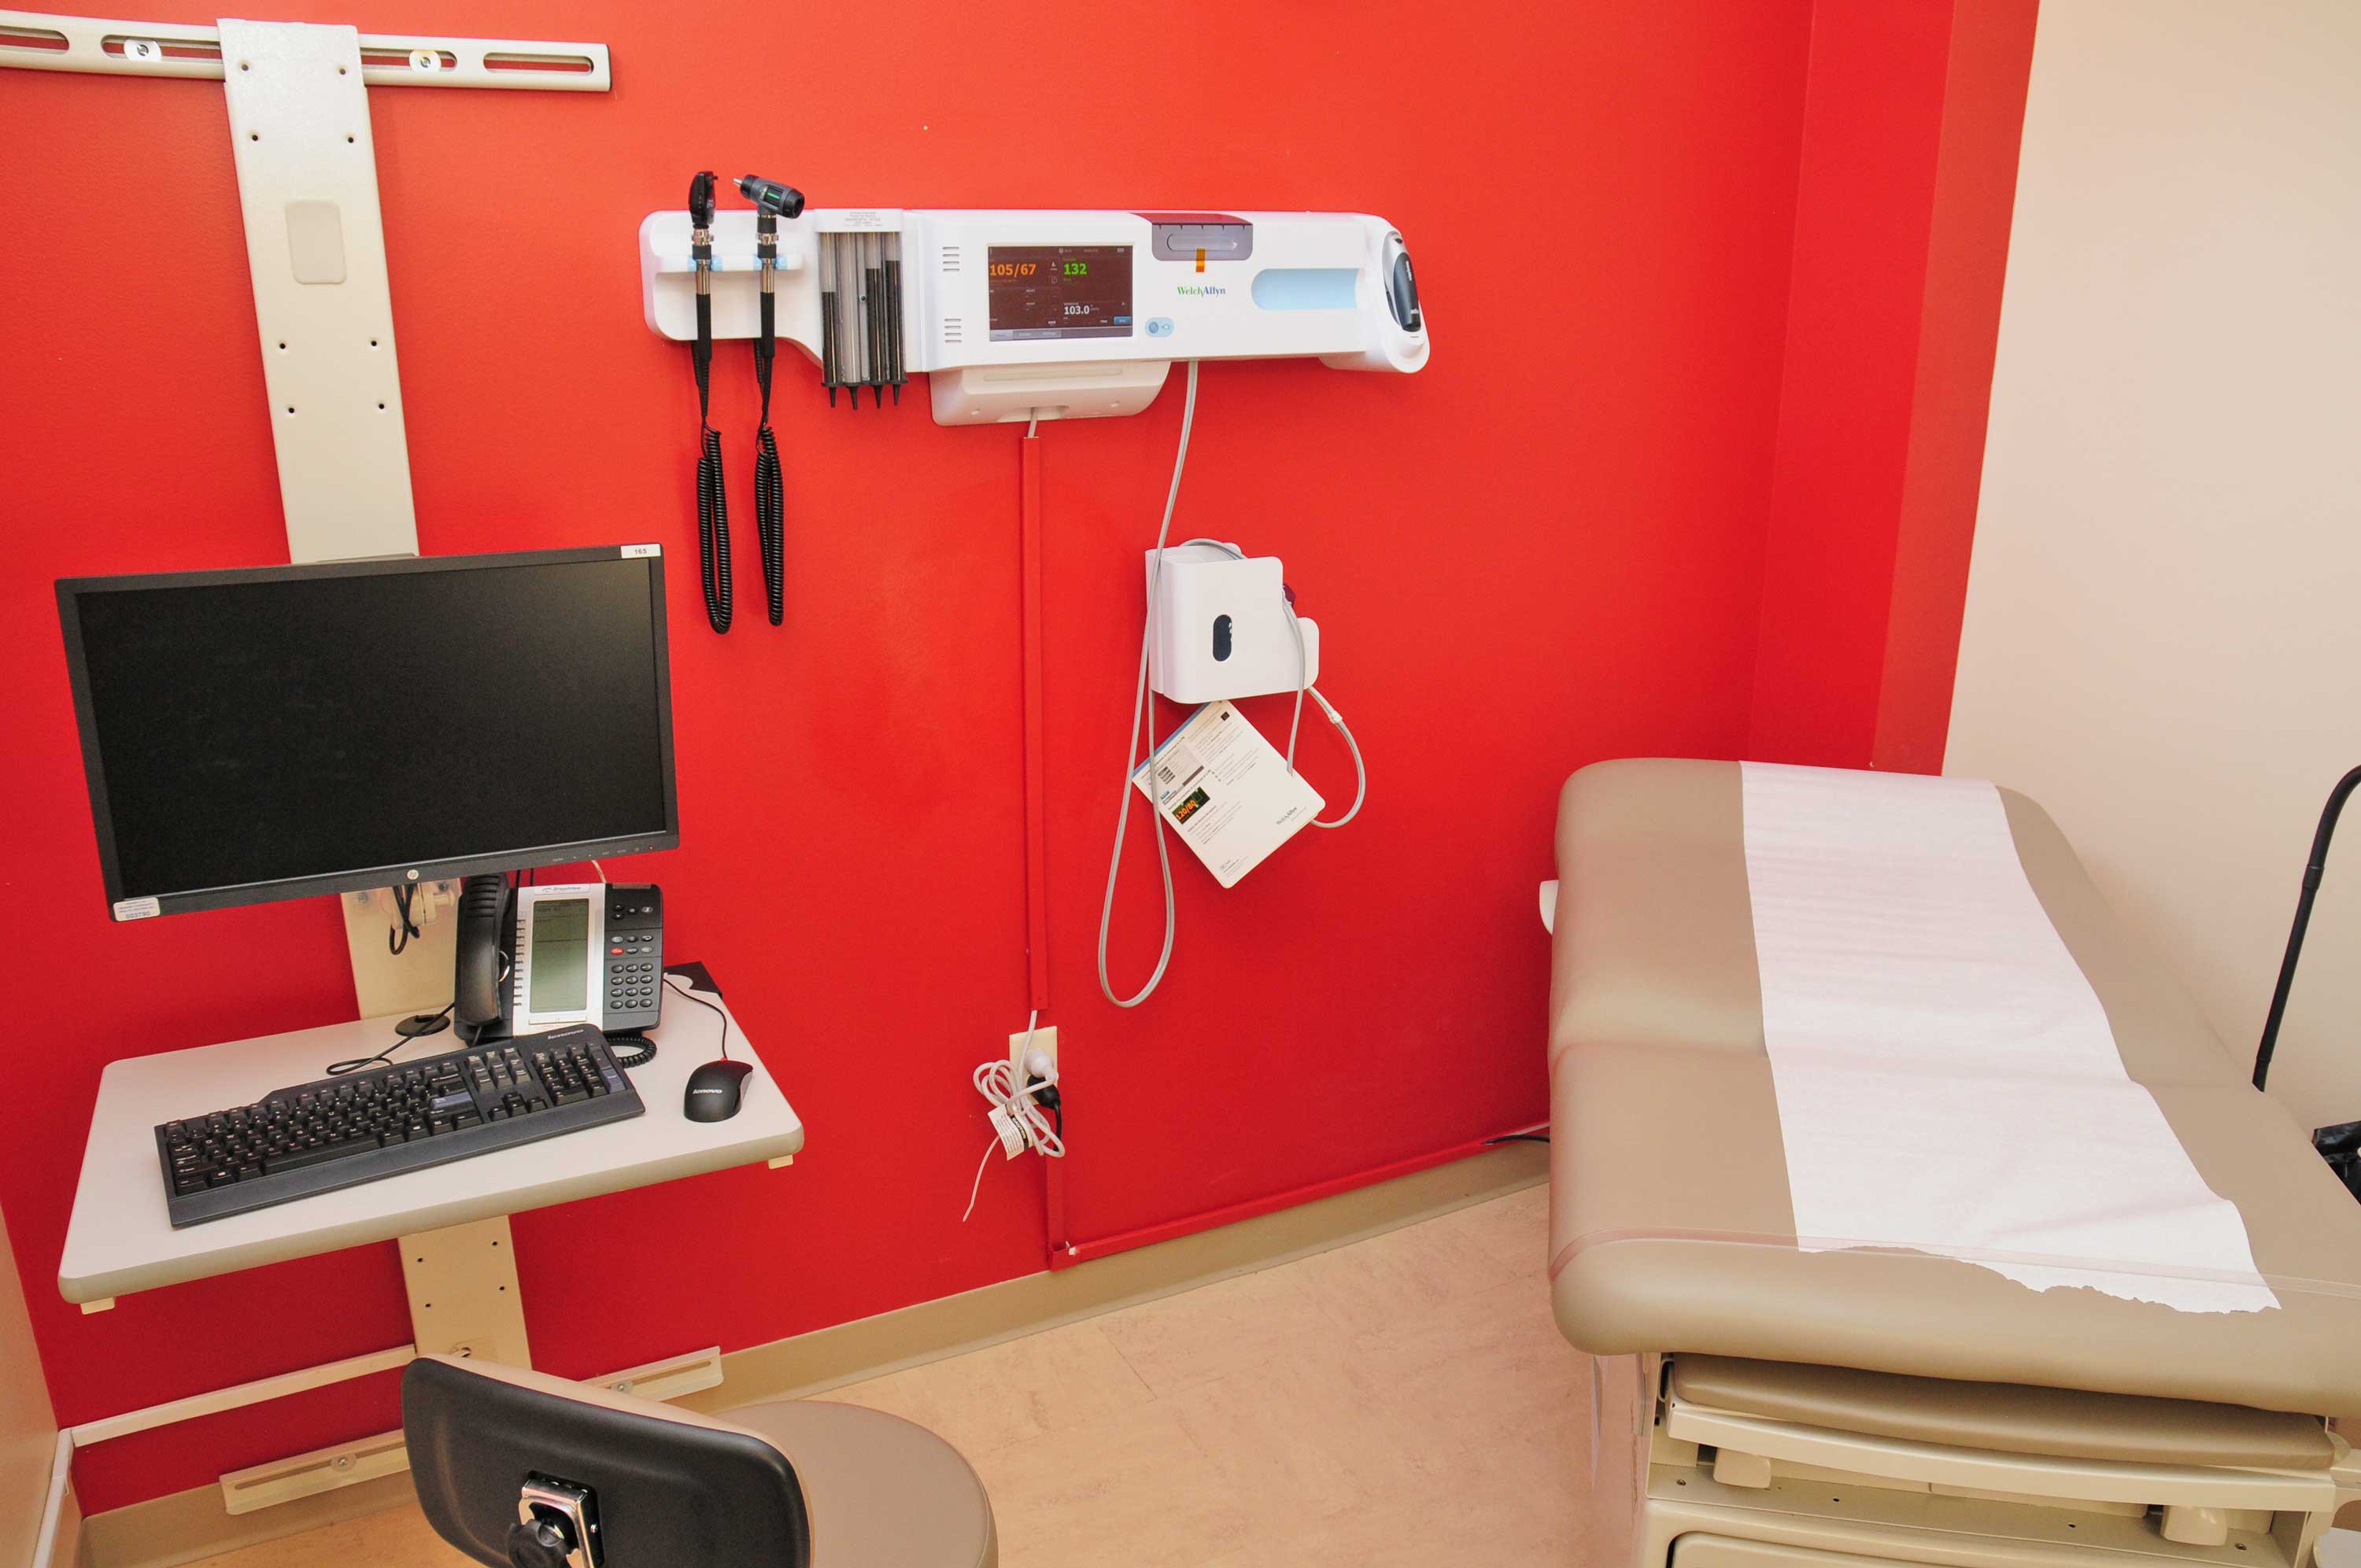 NCHC Center Patient Room